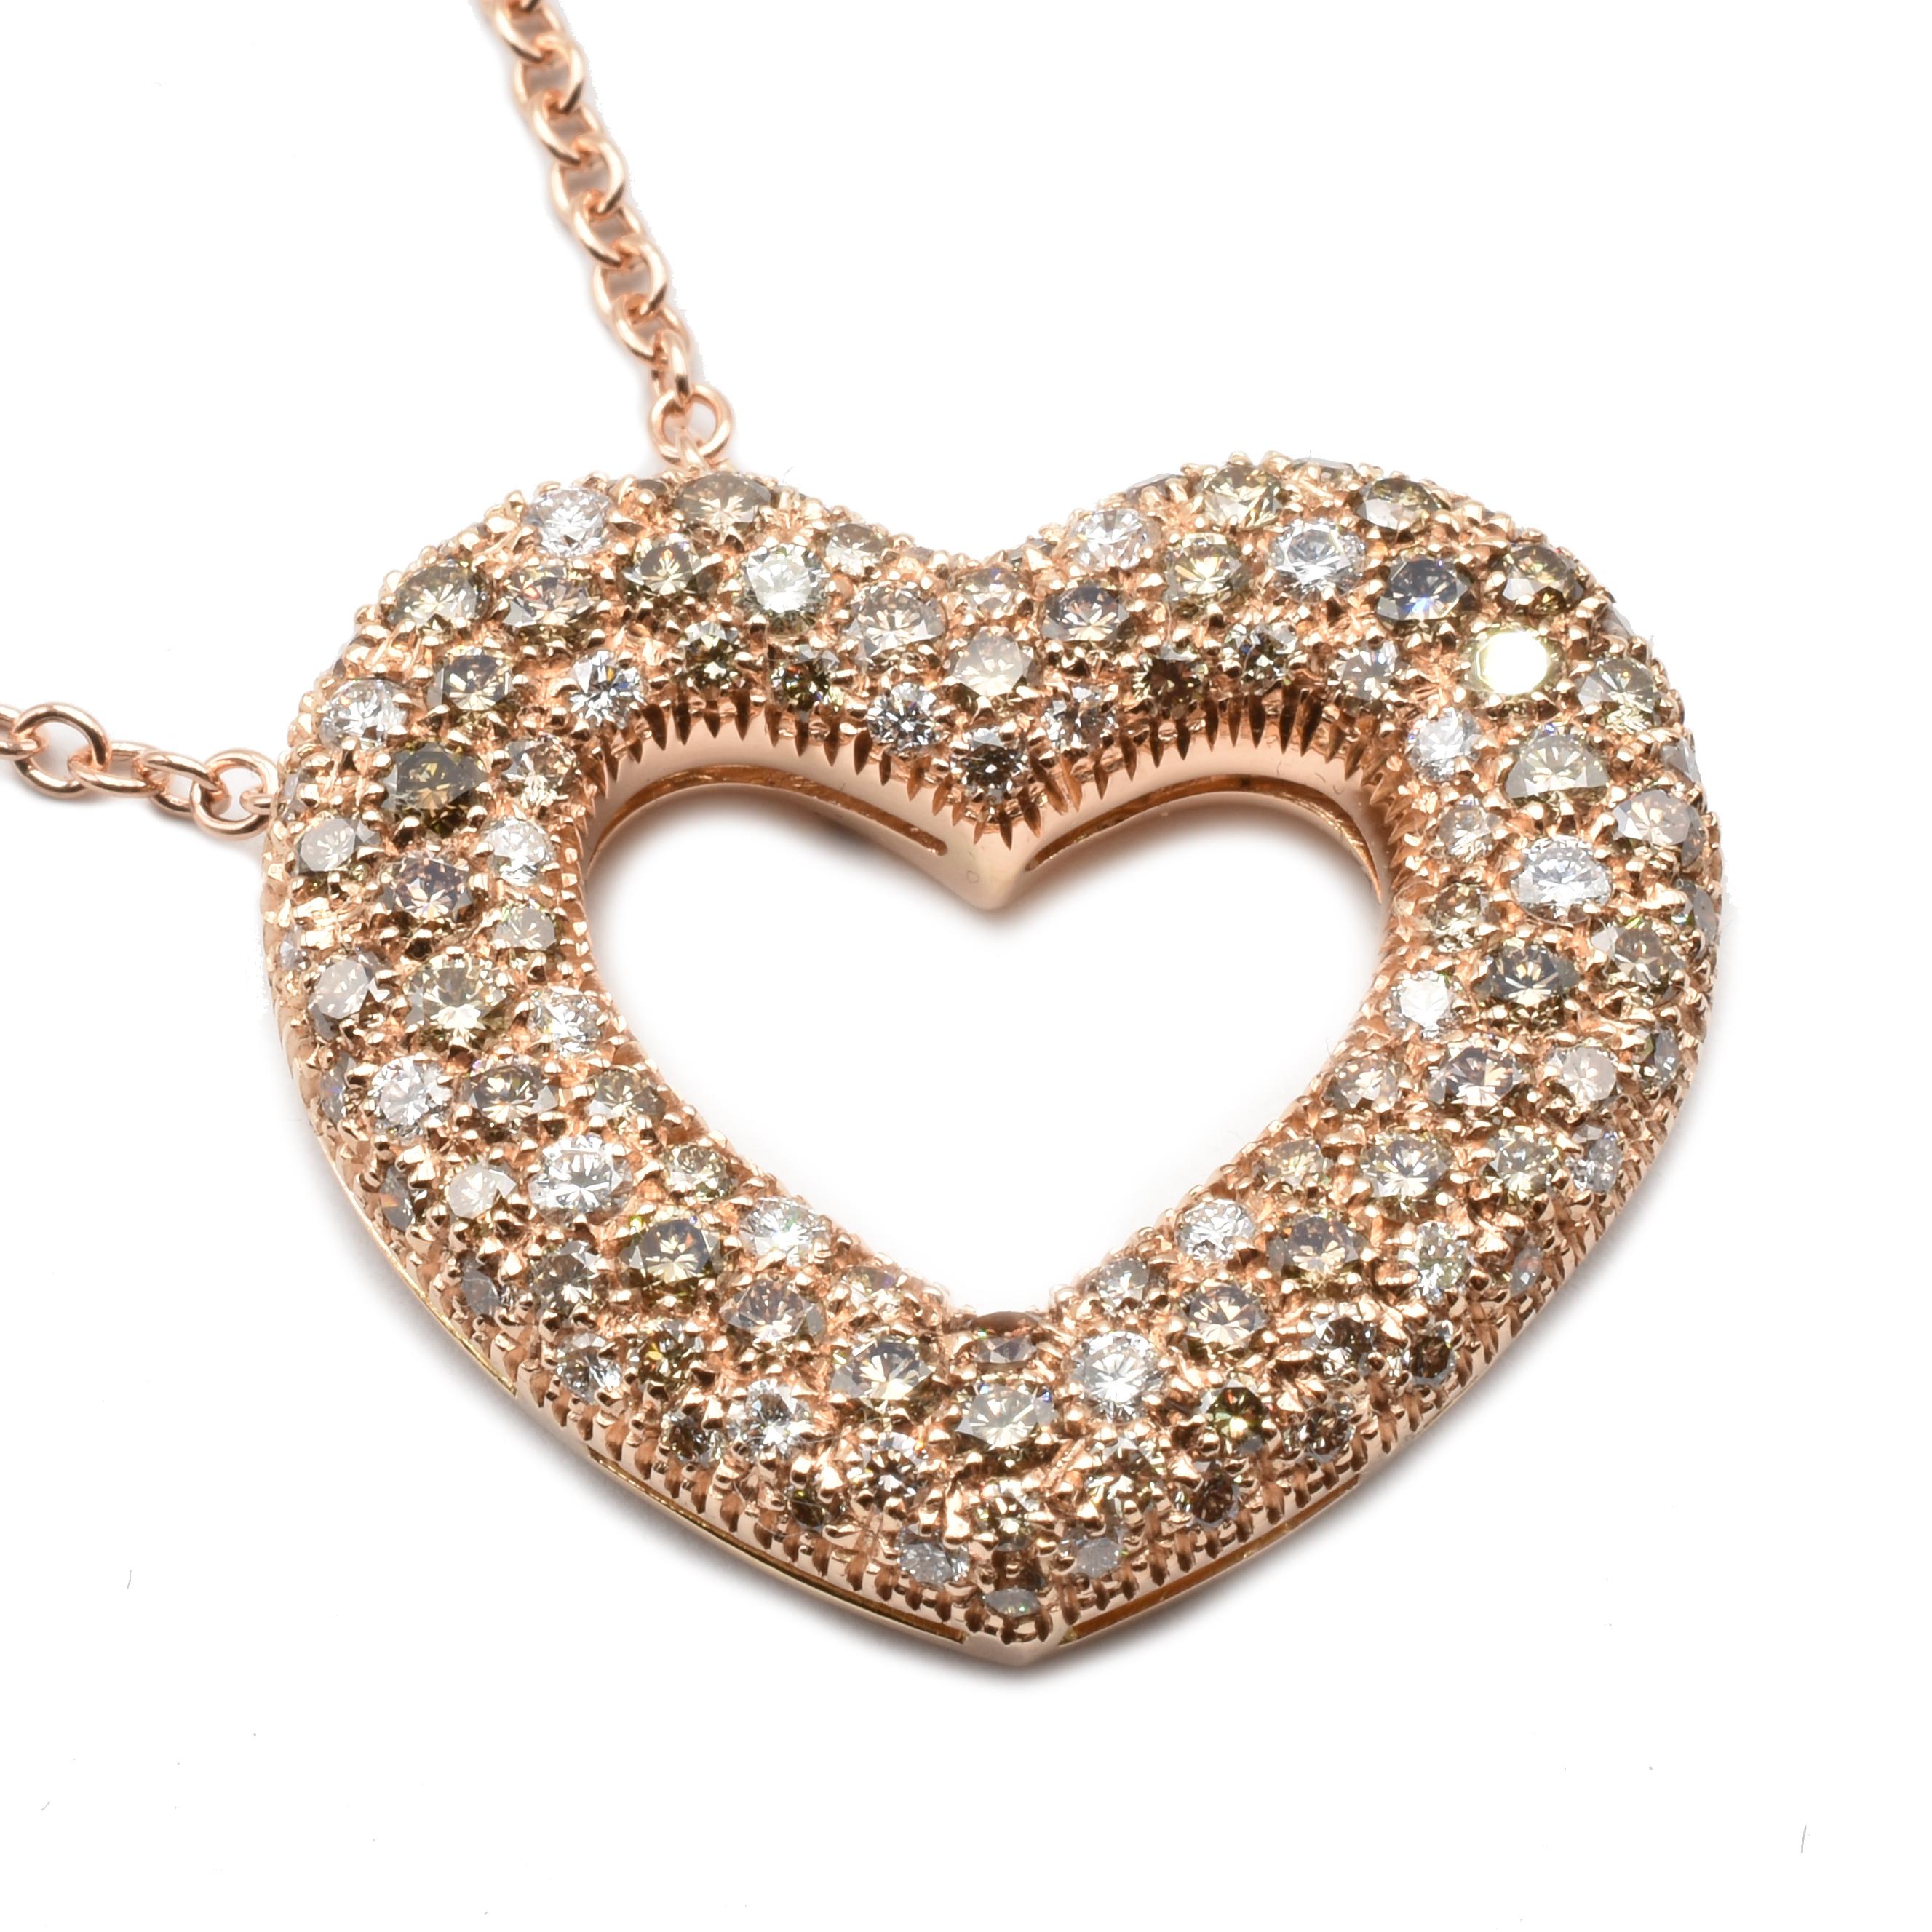 18Kt Rose Gold Heart Pendant Necklace with a mix of Champagne Diamonds (80%) and White Diamonds (20%)
Handmade in Italy in Our Atelier in Valenza (AL)
French Settings. 
18Kt Gold g 12.70
Champagne Diamonds ct 1.99
G Color Vs Clarity White Diamonds